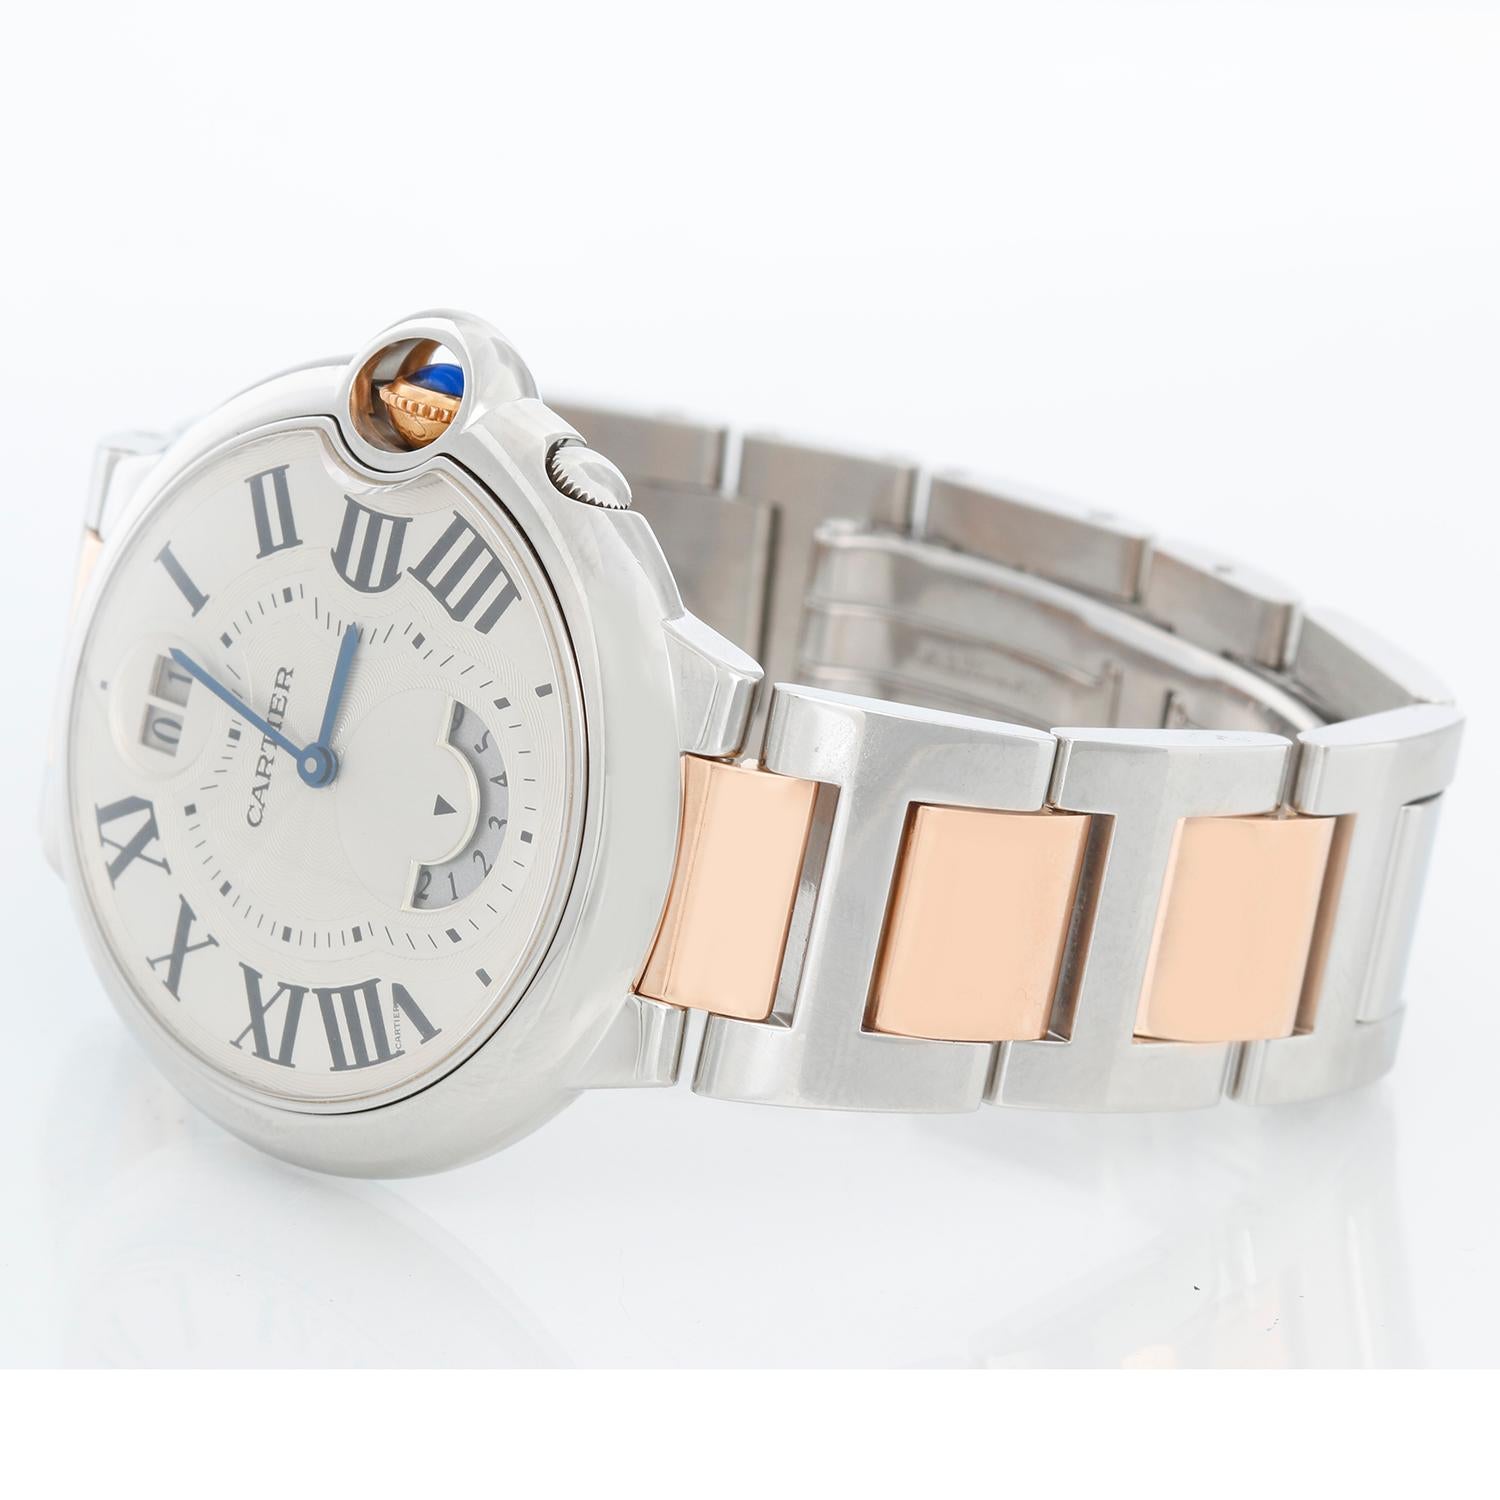 Cartier Ballon Bleu Two Timezone Rose Gold & Stainless Steel Watch W6920027 - Quartz. Stainless steel & Rose Gold case (38 mm ). Silvered opaline dial with blue steel hands and Roman numeral hour markers. GMT sub-dial above the 6 o'clock position.